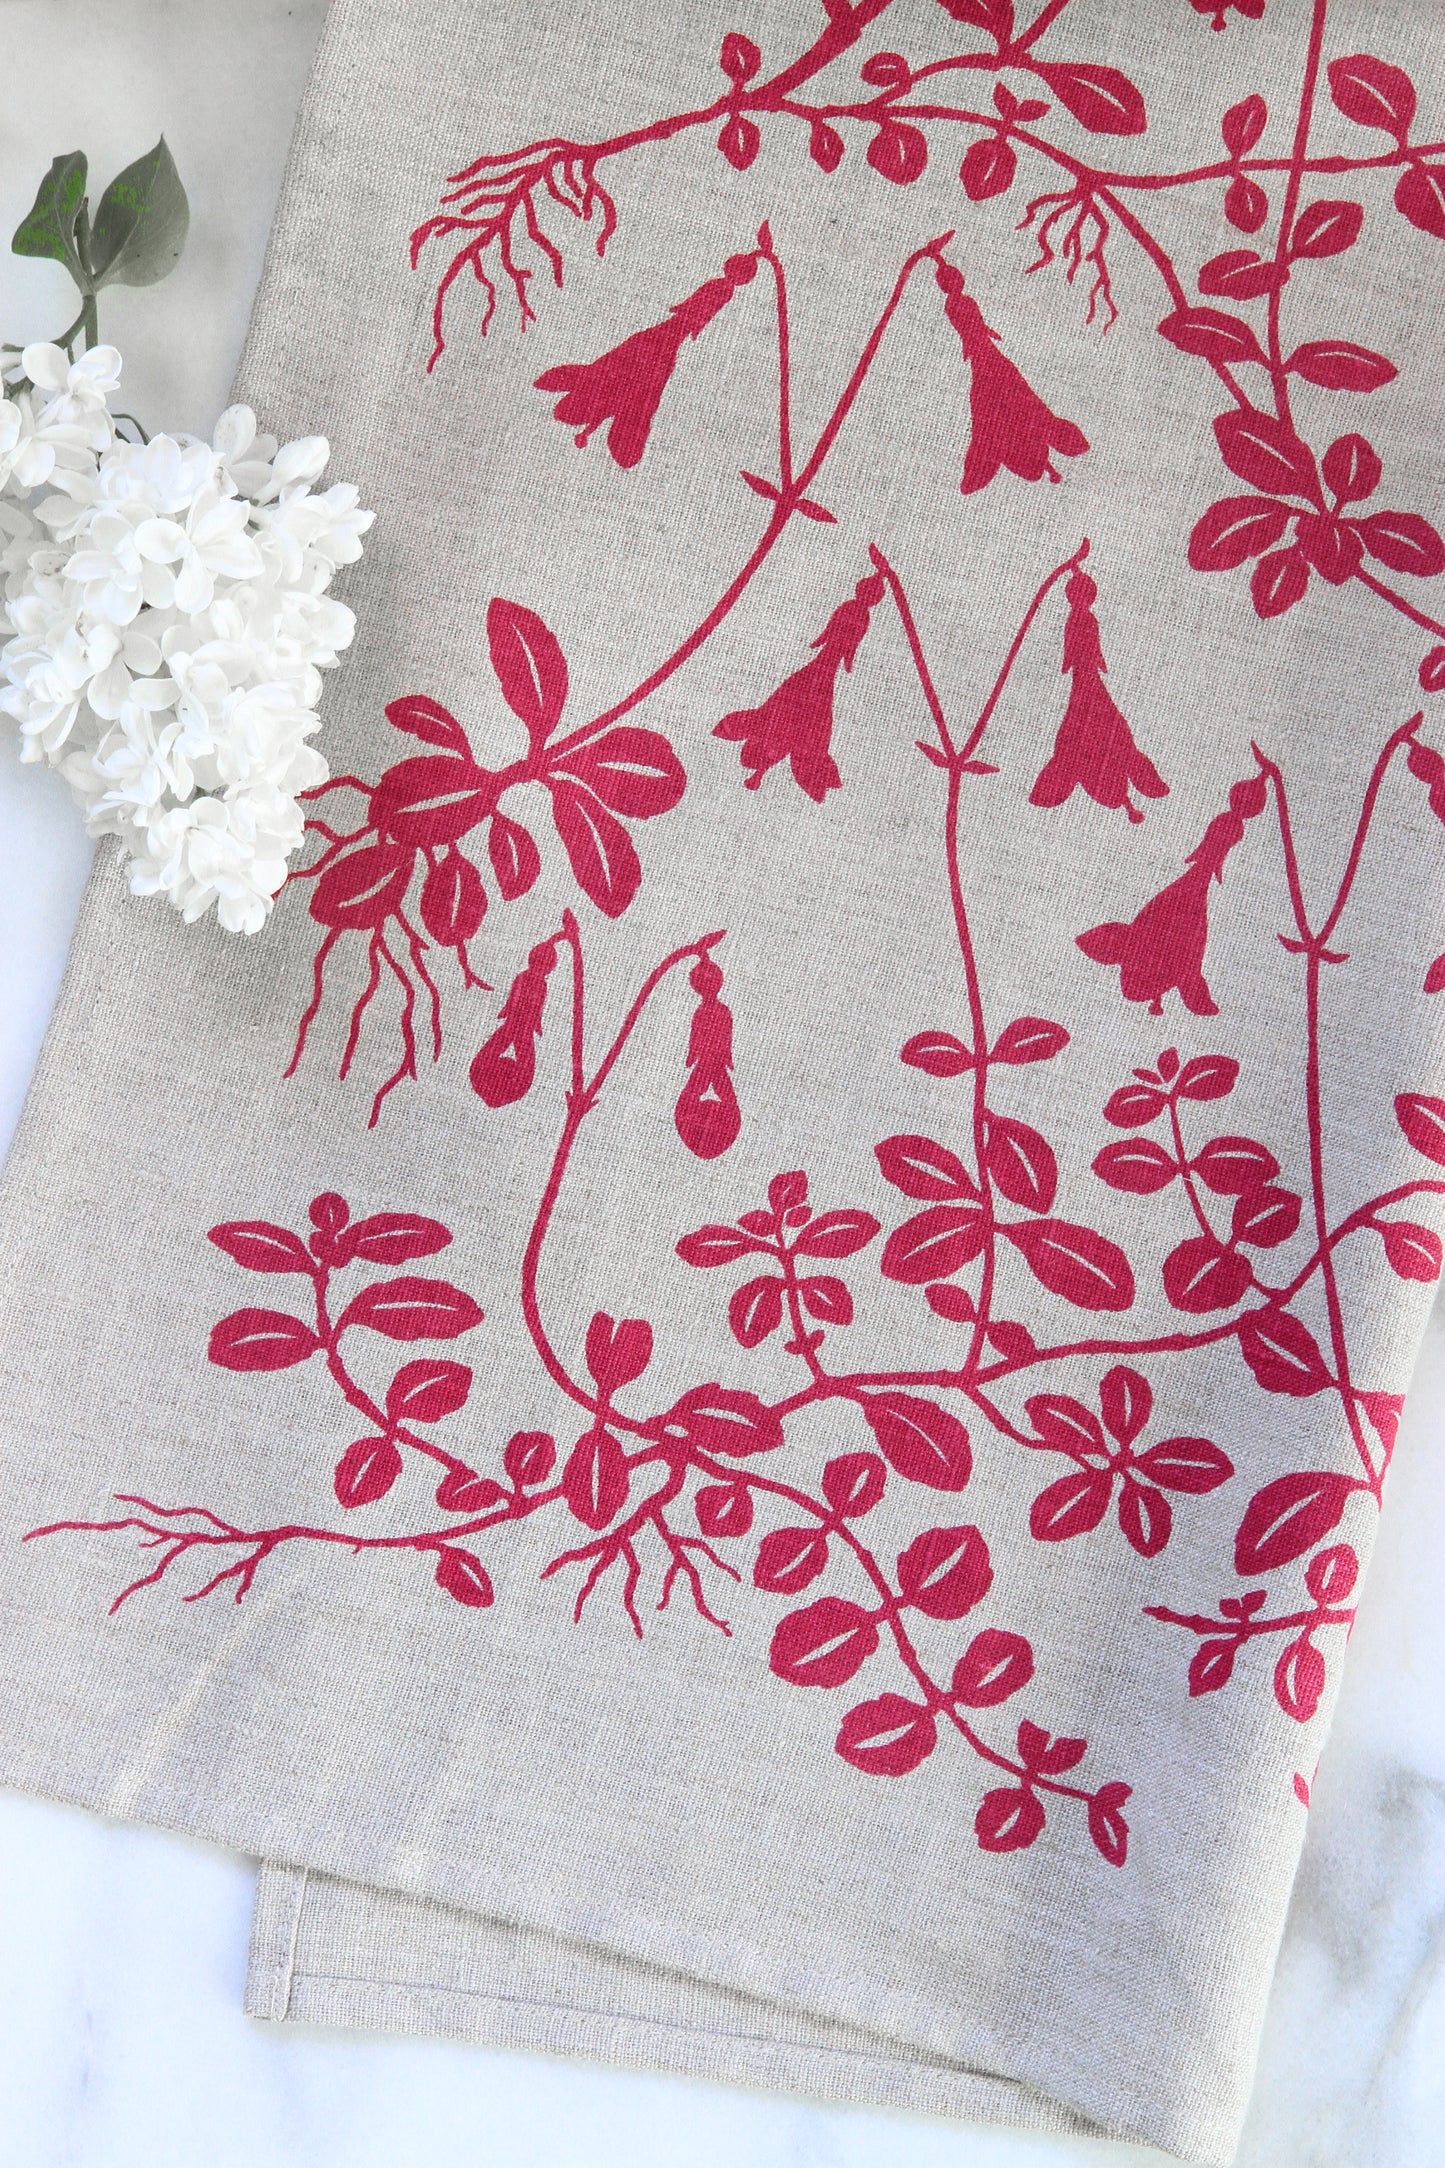 Twinflower Kitchen Towel in Peony Pink on Natural Linen